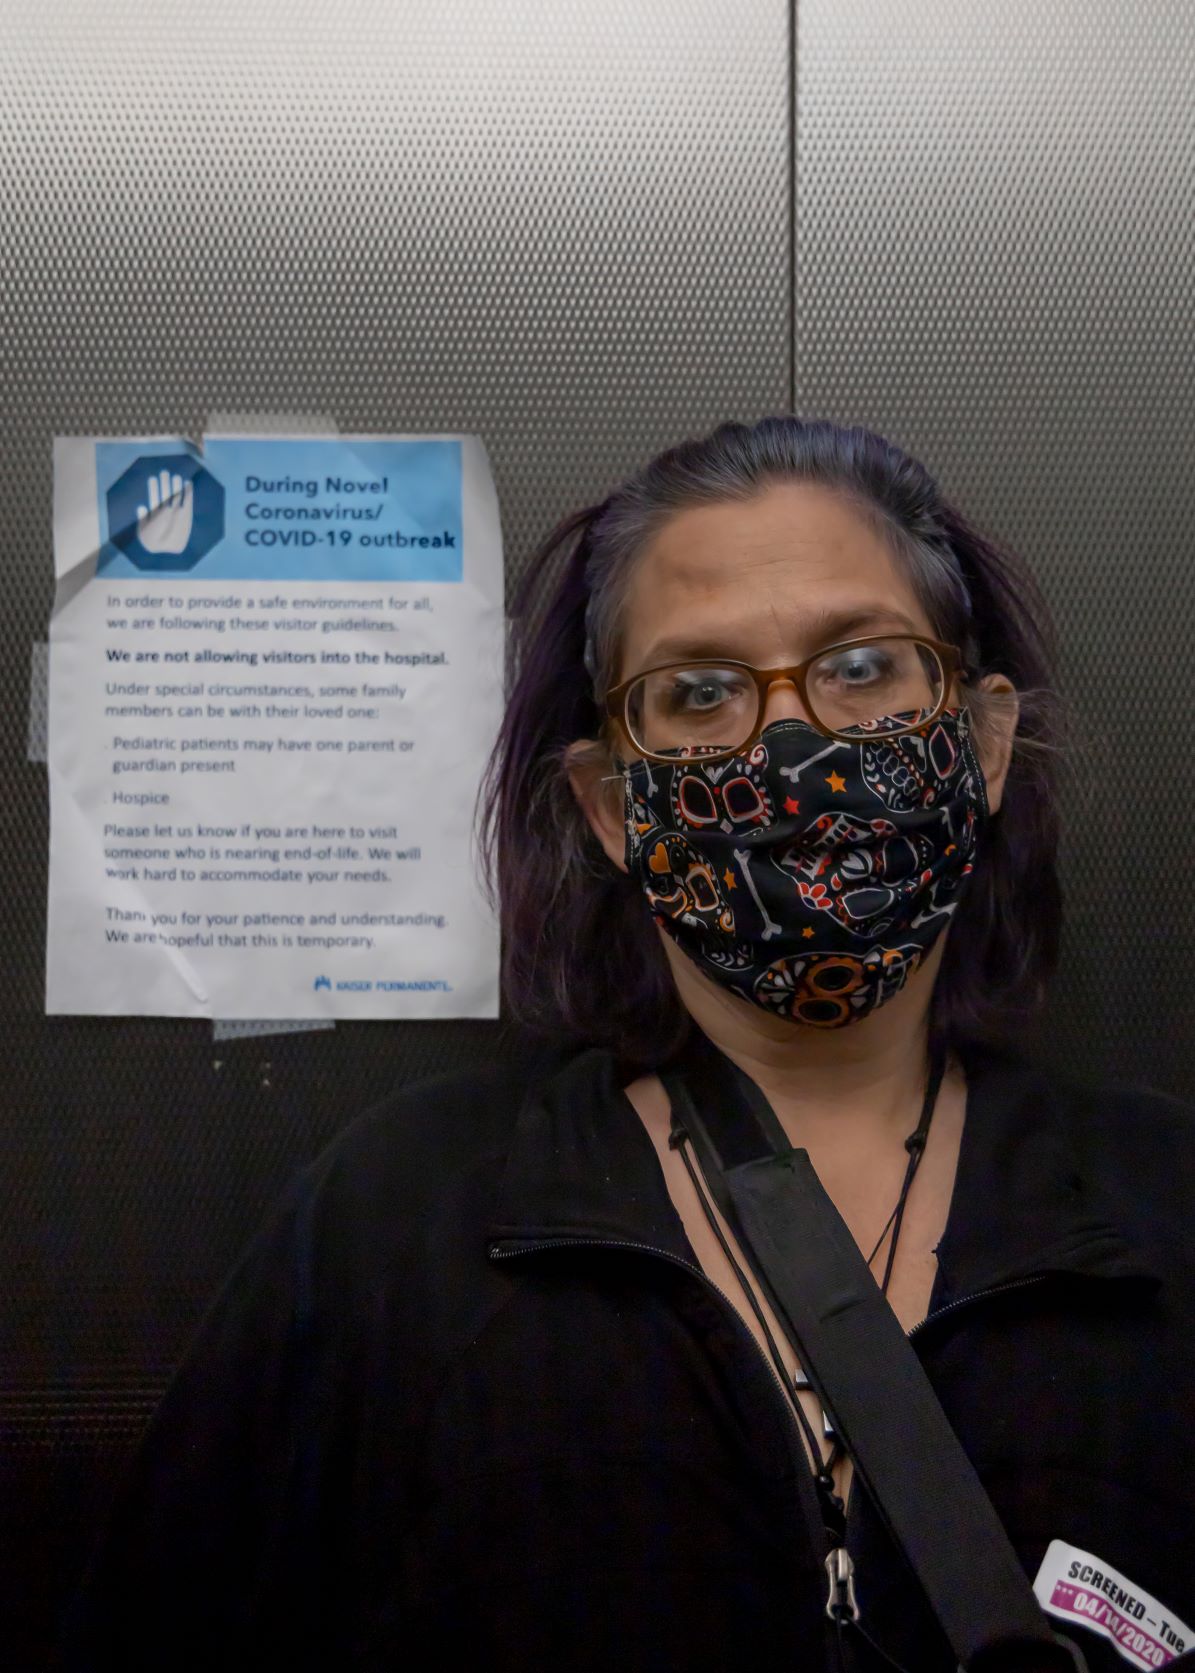 Anne Marie Flores, a visitor wears a mask and gloves standing in a Kaiser hospital elevator in front of a sign stating the rules regarding visitors during the COVID-19 pandemic.